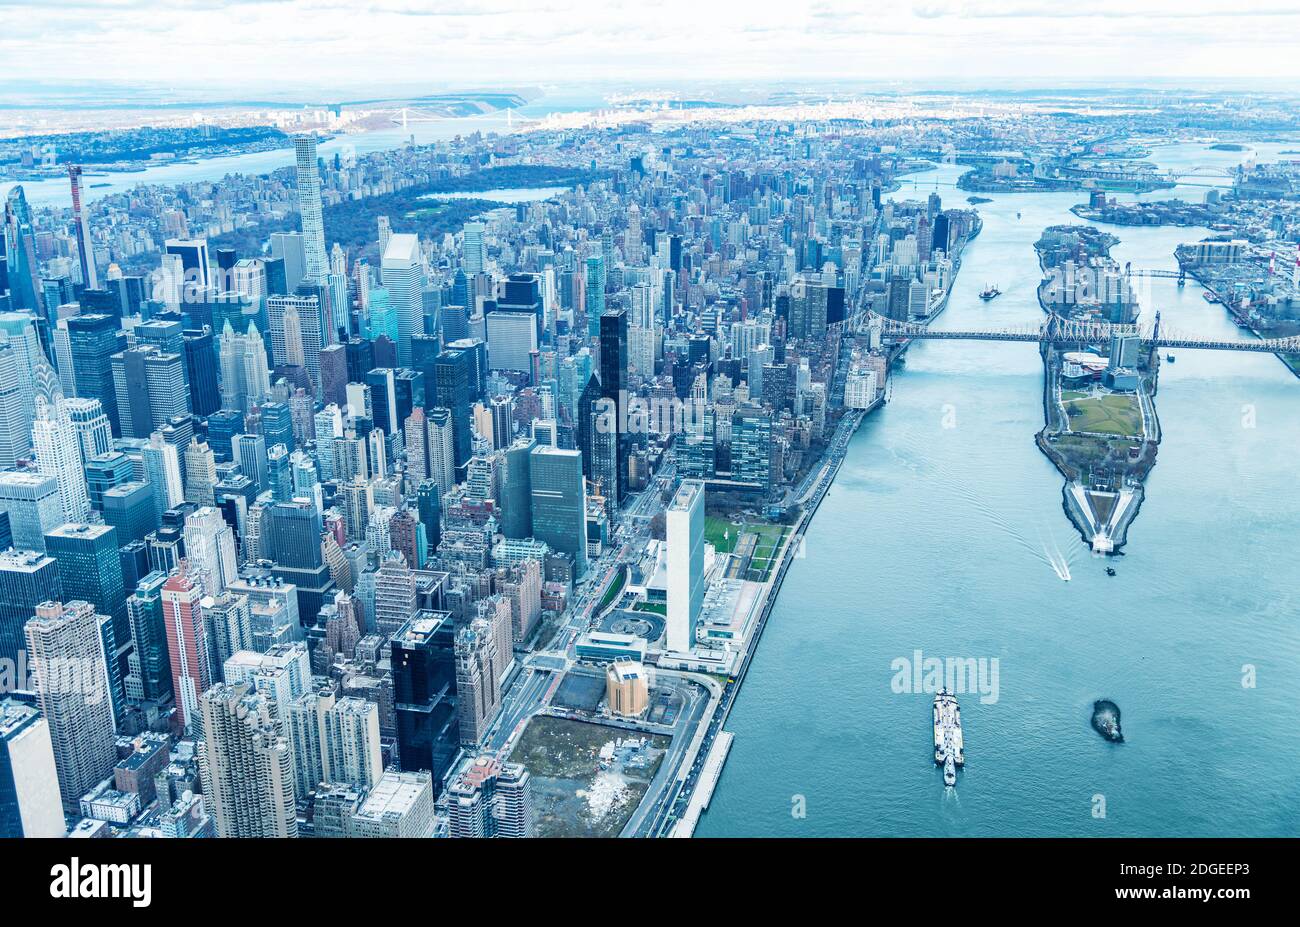 Aerial view of Manhattan buildings and Roosevelt Island on the East River from helicopter Stock Photo